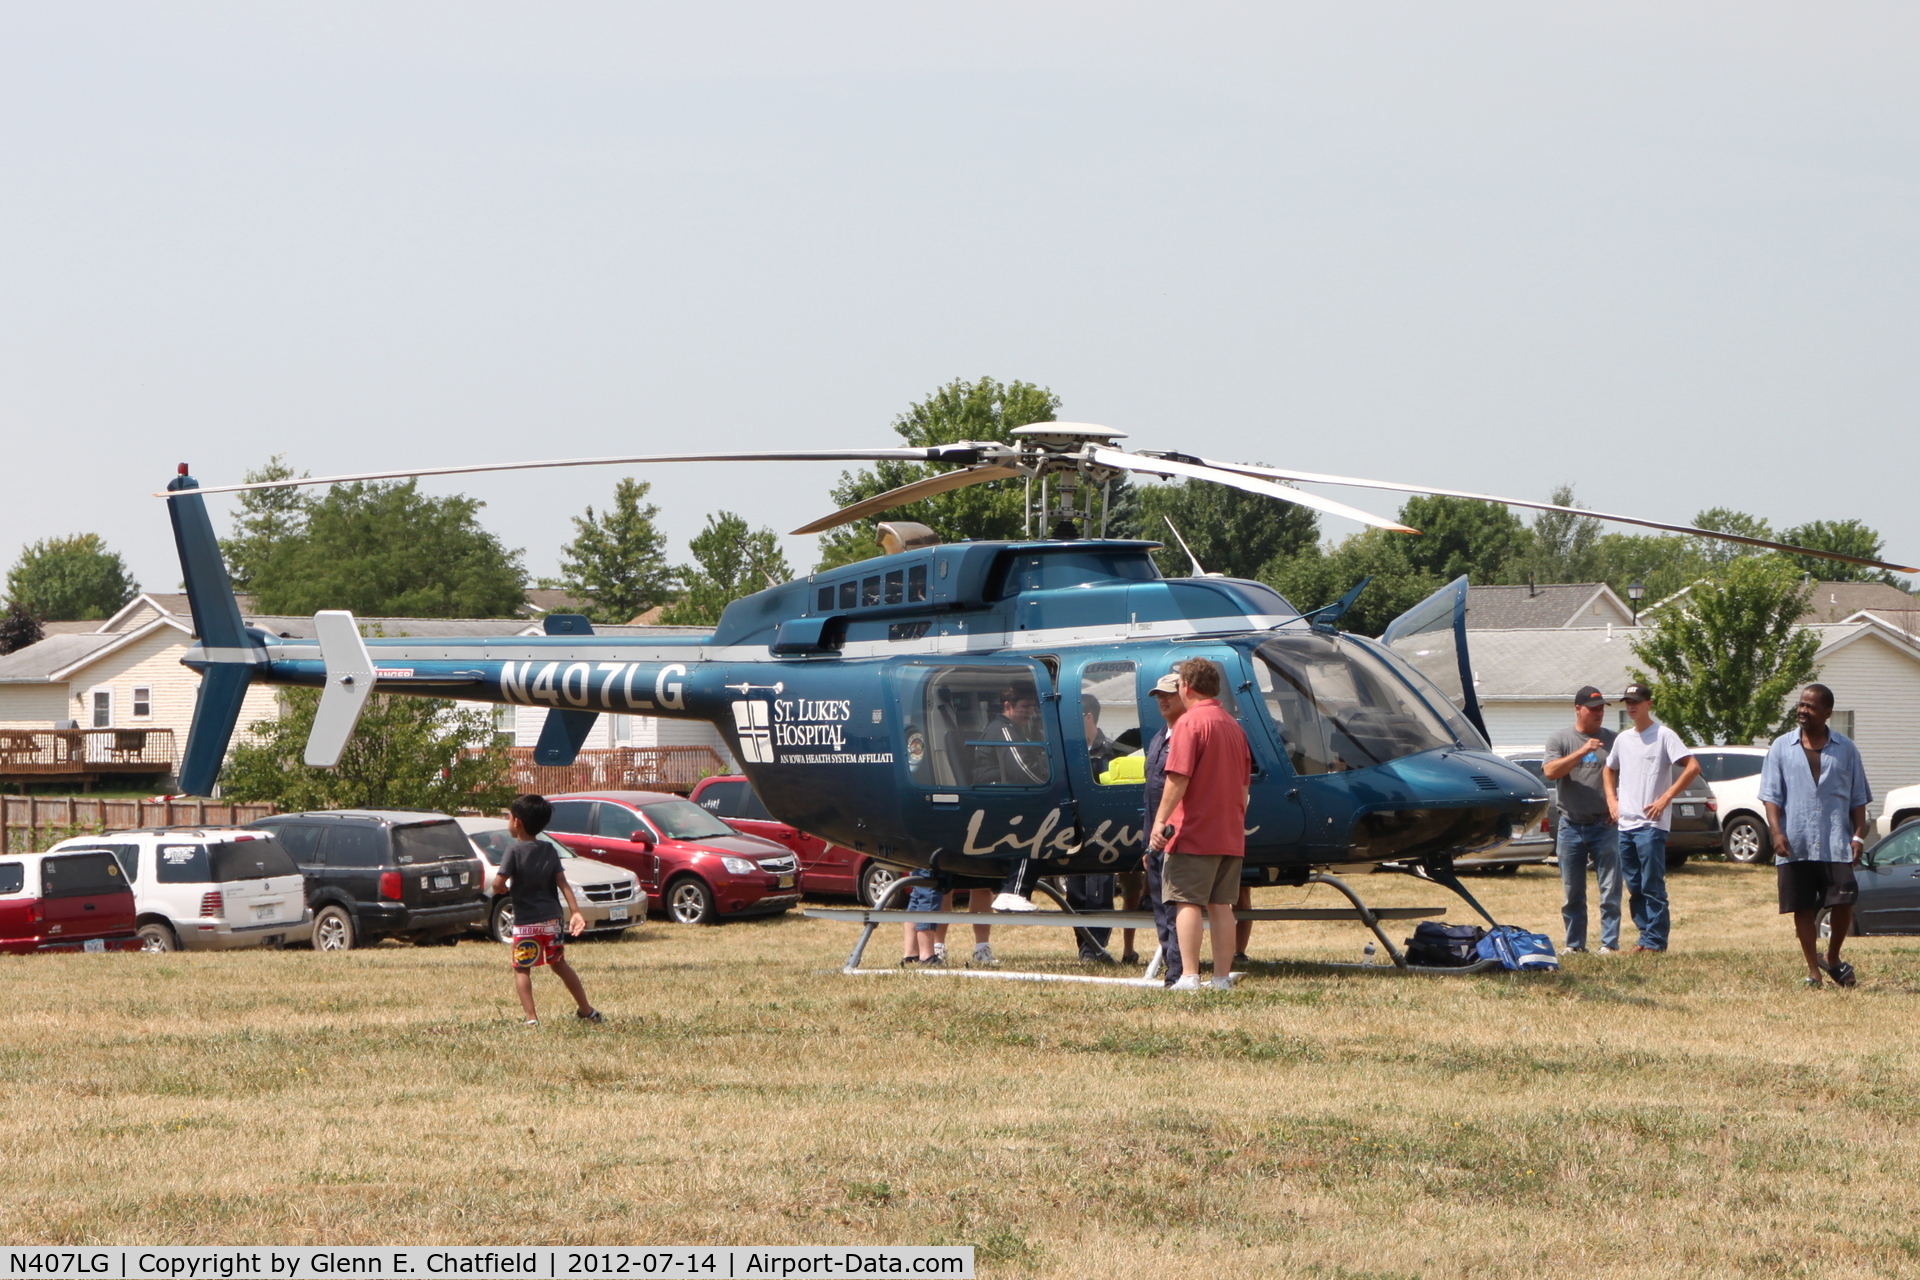 N407LG, 1997 Bell 407 C/N 53143, On display at North Liberty, IA during grand opening of local shopping center.